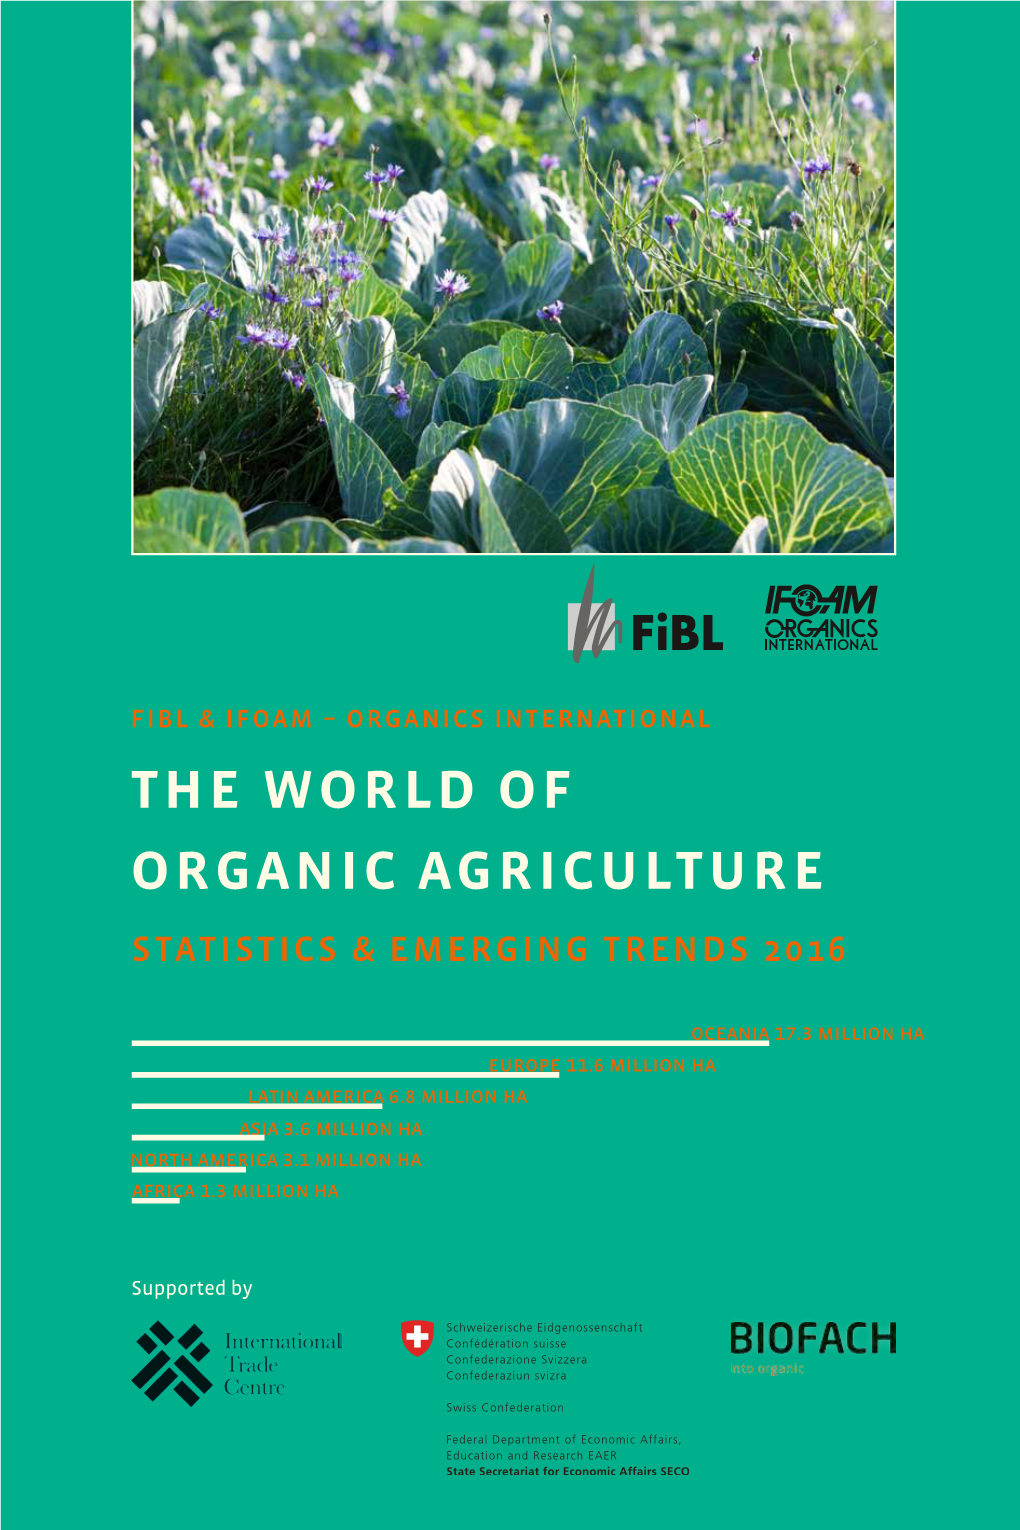 The World of Organic Agriculture STATISTICS & EMERGING TRENDS 2016